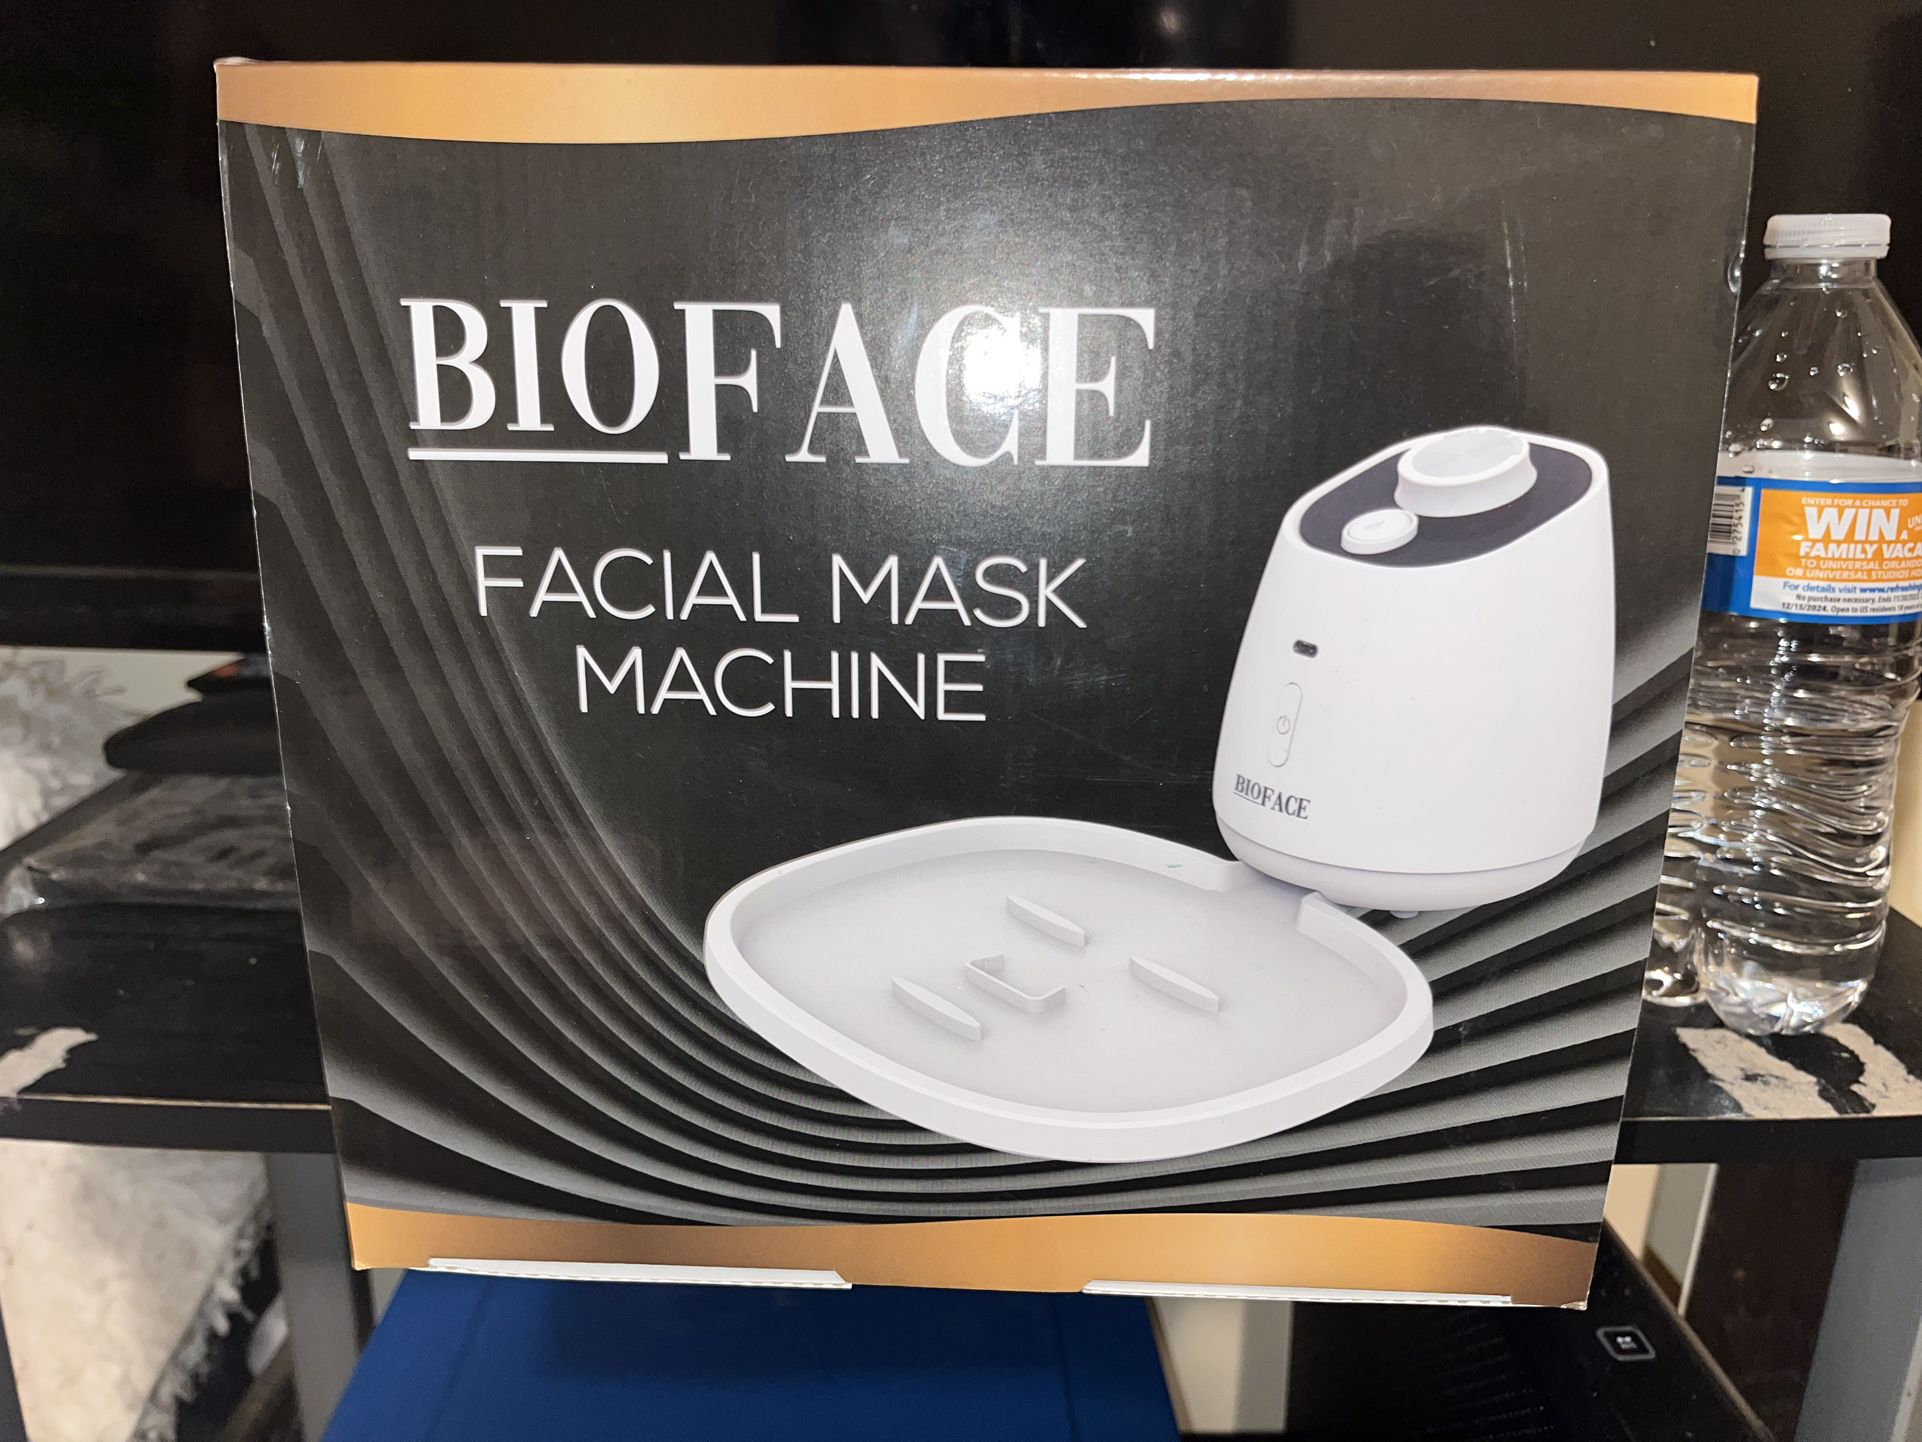 Face Mask 